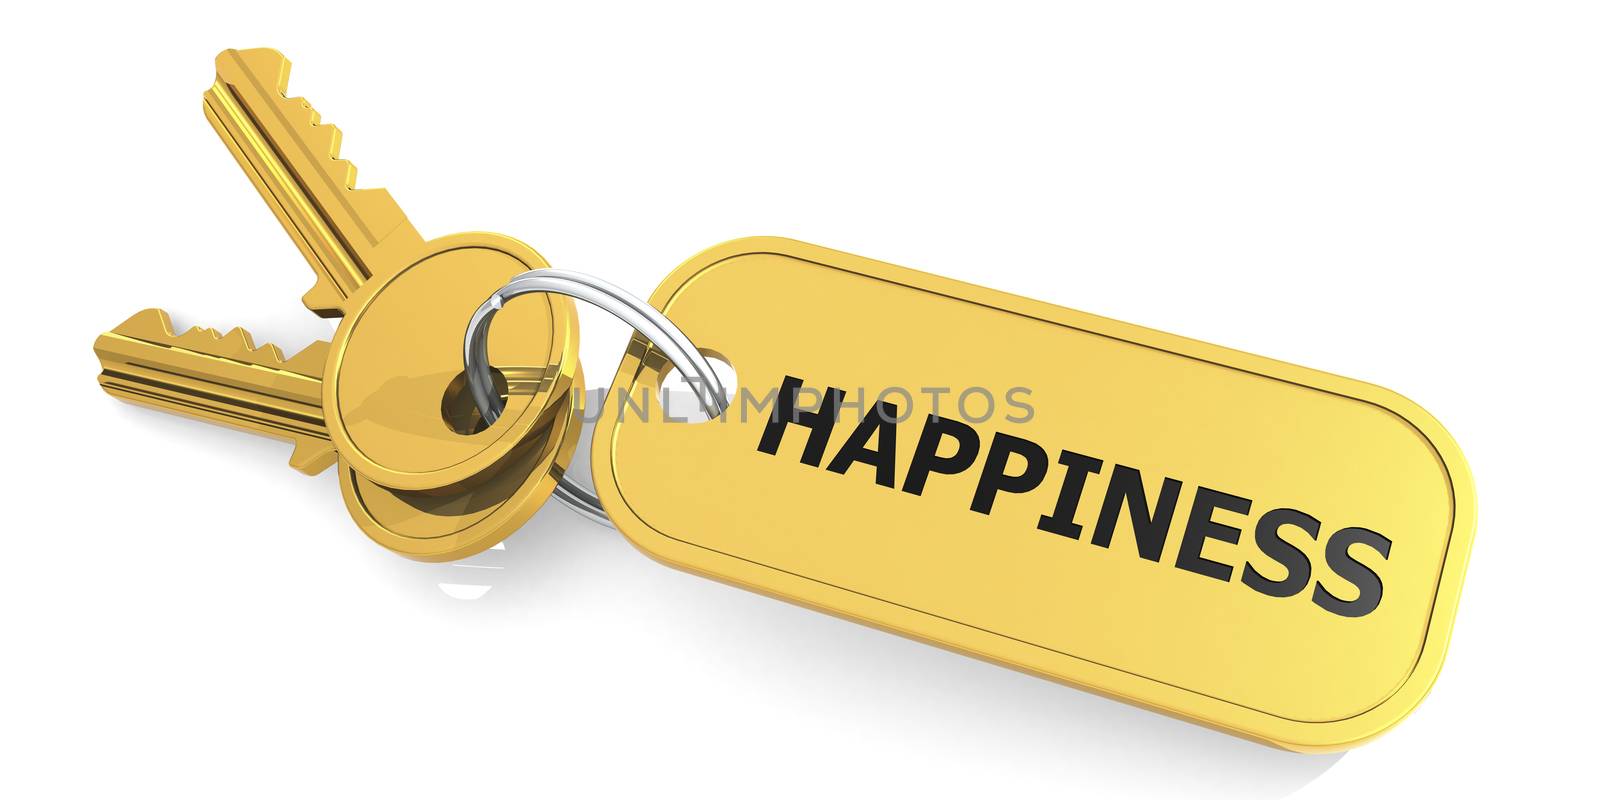 Happiness keys isolated with white background, 3D rendering